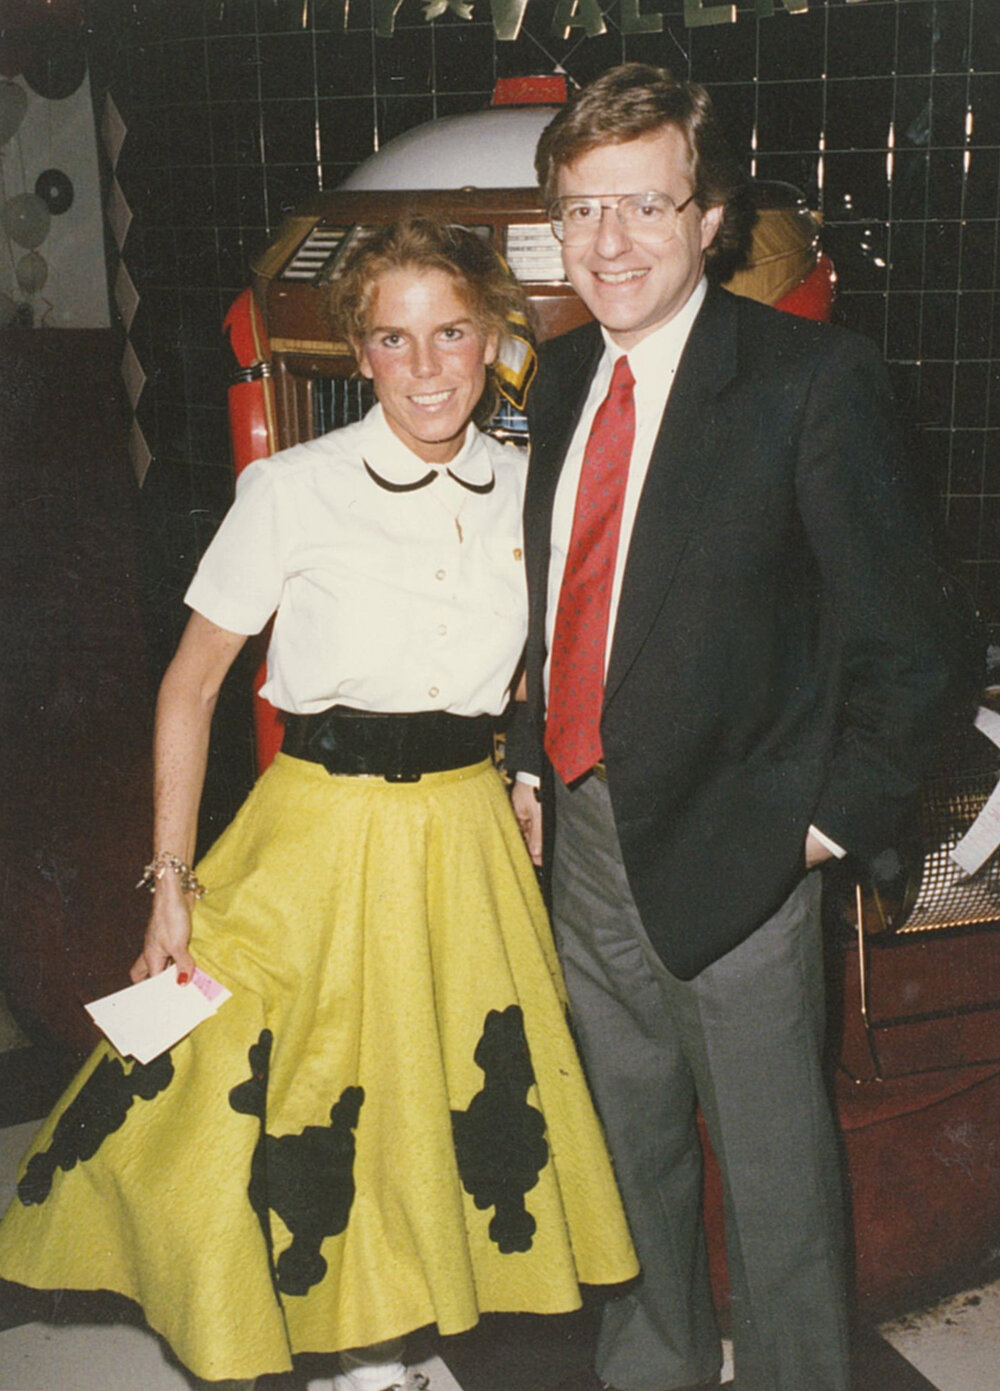  Patty is photographed at a Cincinnati Opera fundraiser with Jerry Springer, former Cincinnati mayor and television host. 